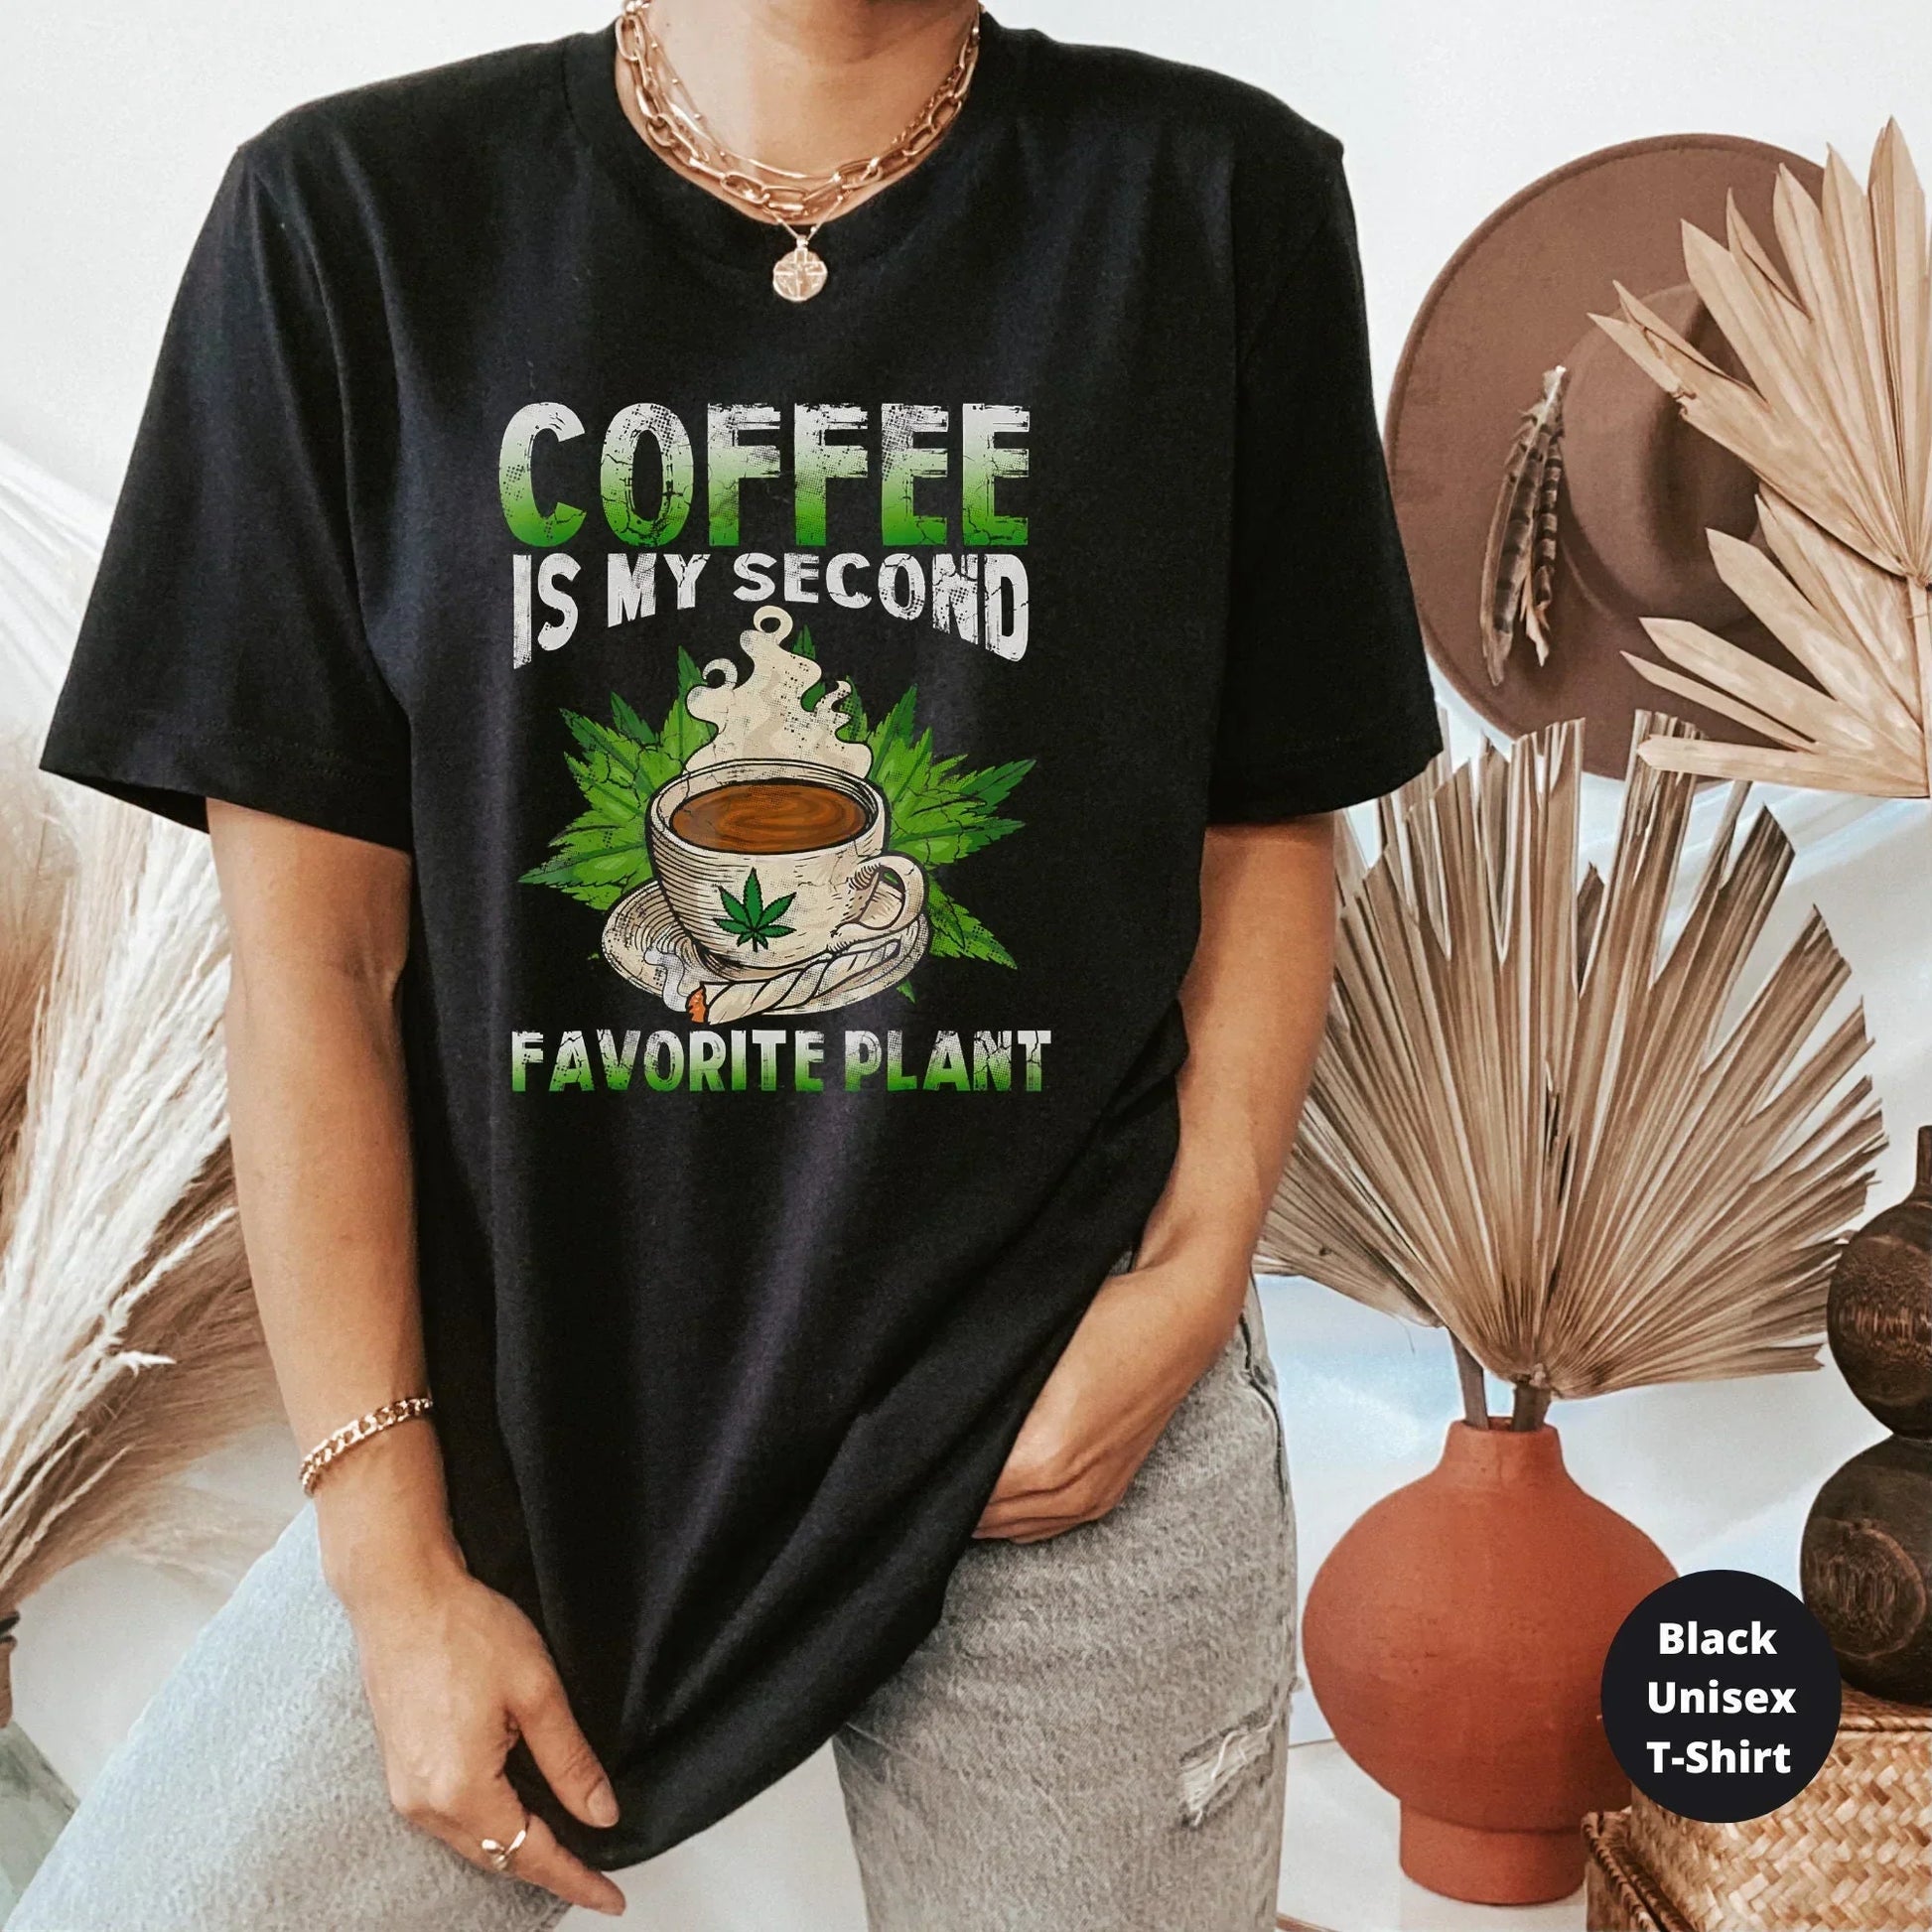 Coffee is My Second Favorite Plant, Coffee and Weed Lover Shirt HMDesignStudioUS